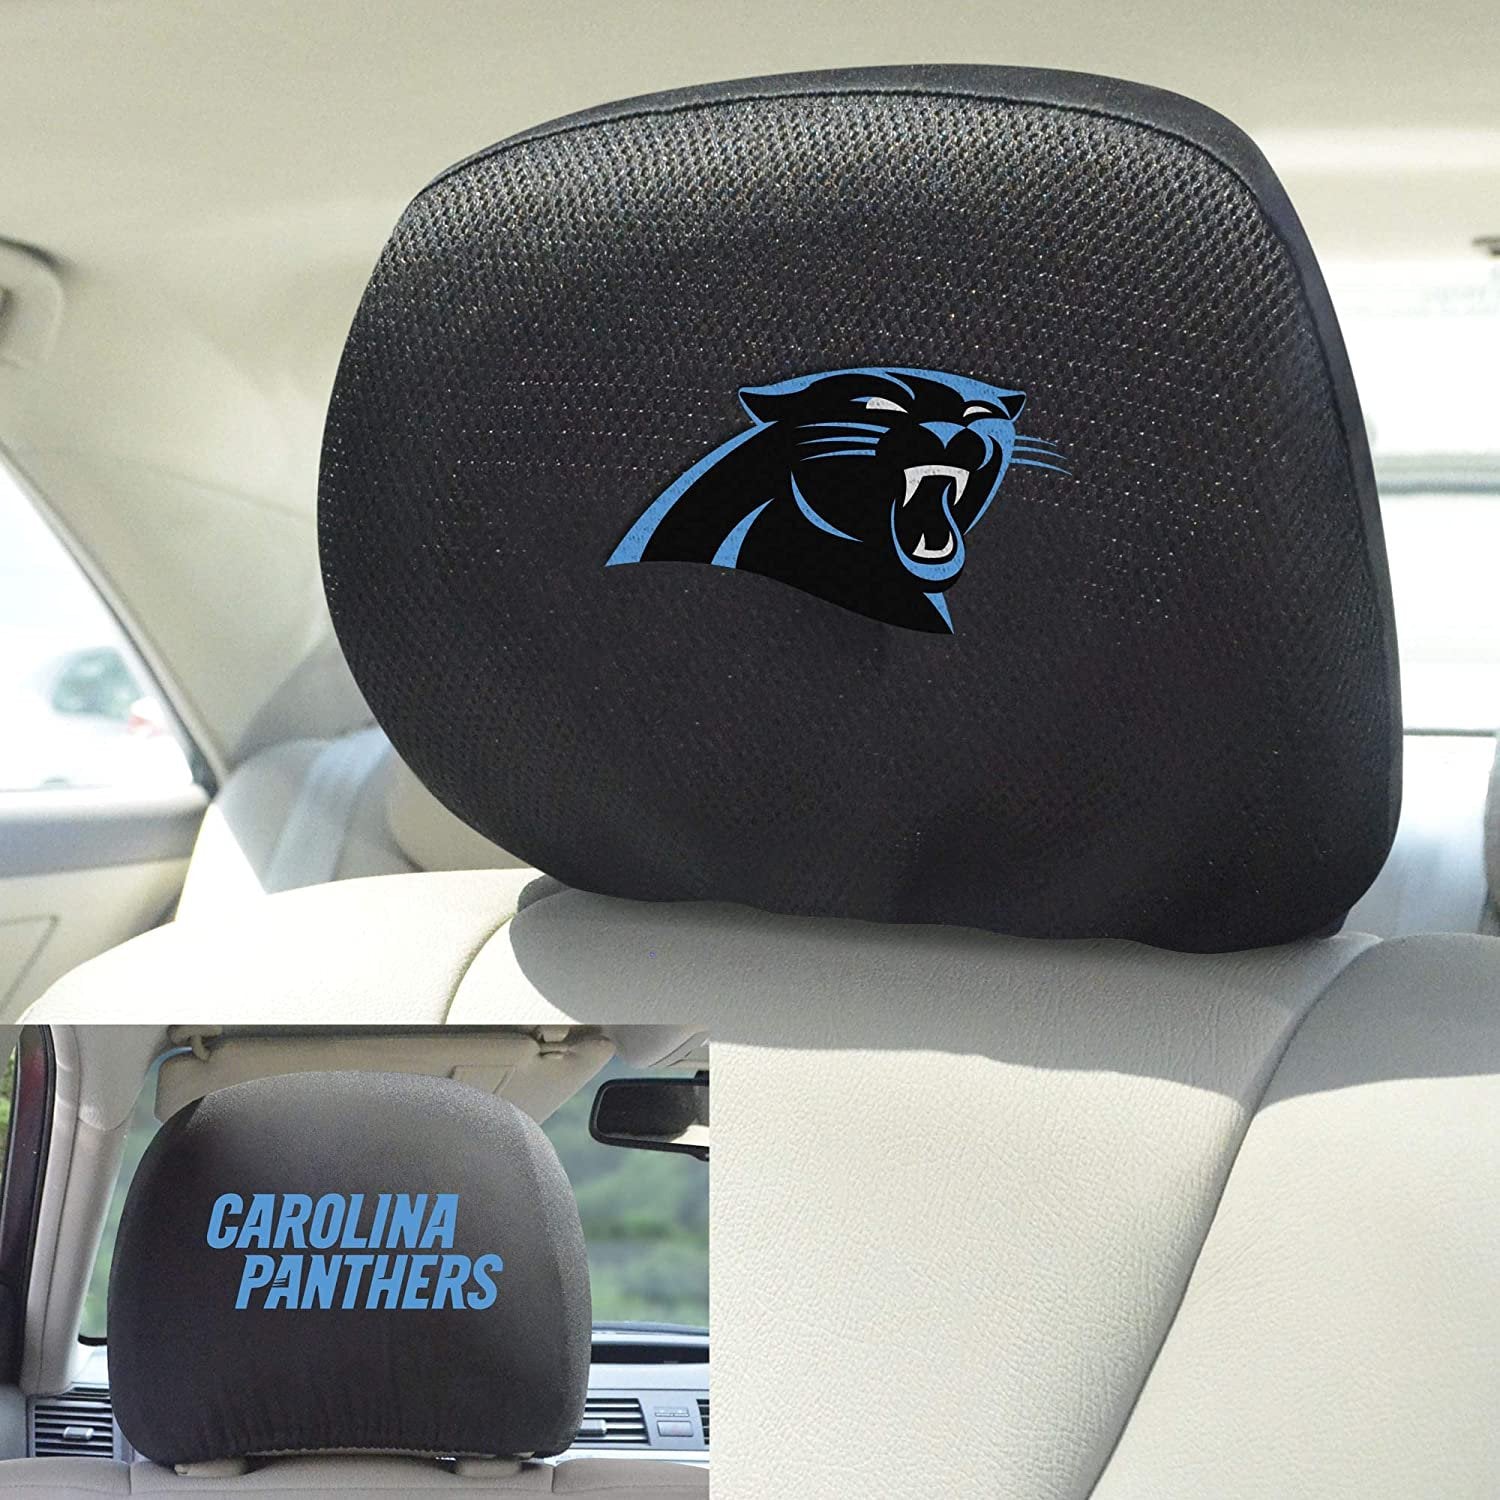 Carolina Panthers Pair of Premium Auto Head Rest Covers, Embroidered, Black Elastic, 14x10 Inch